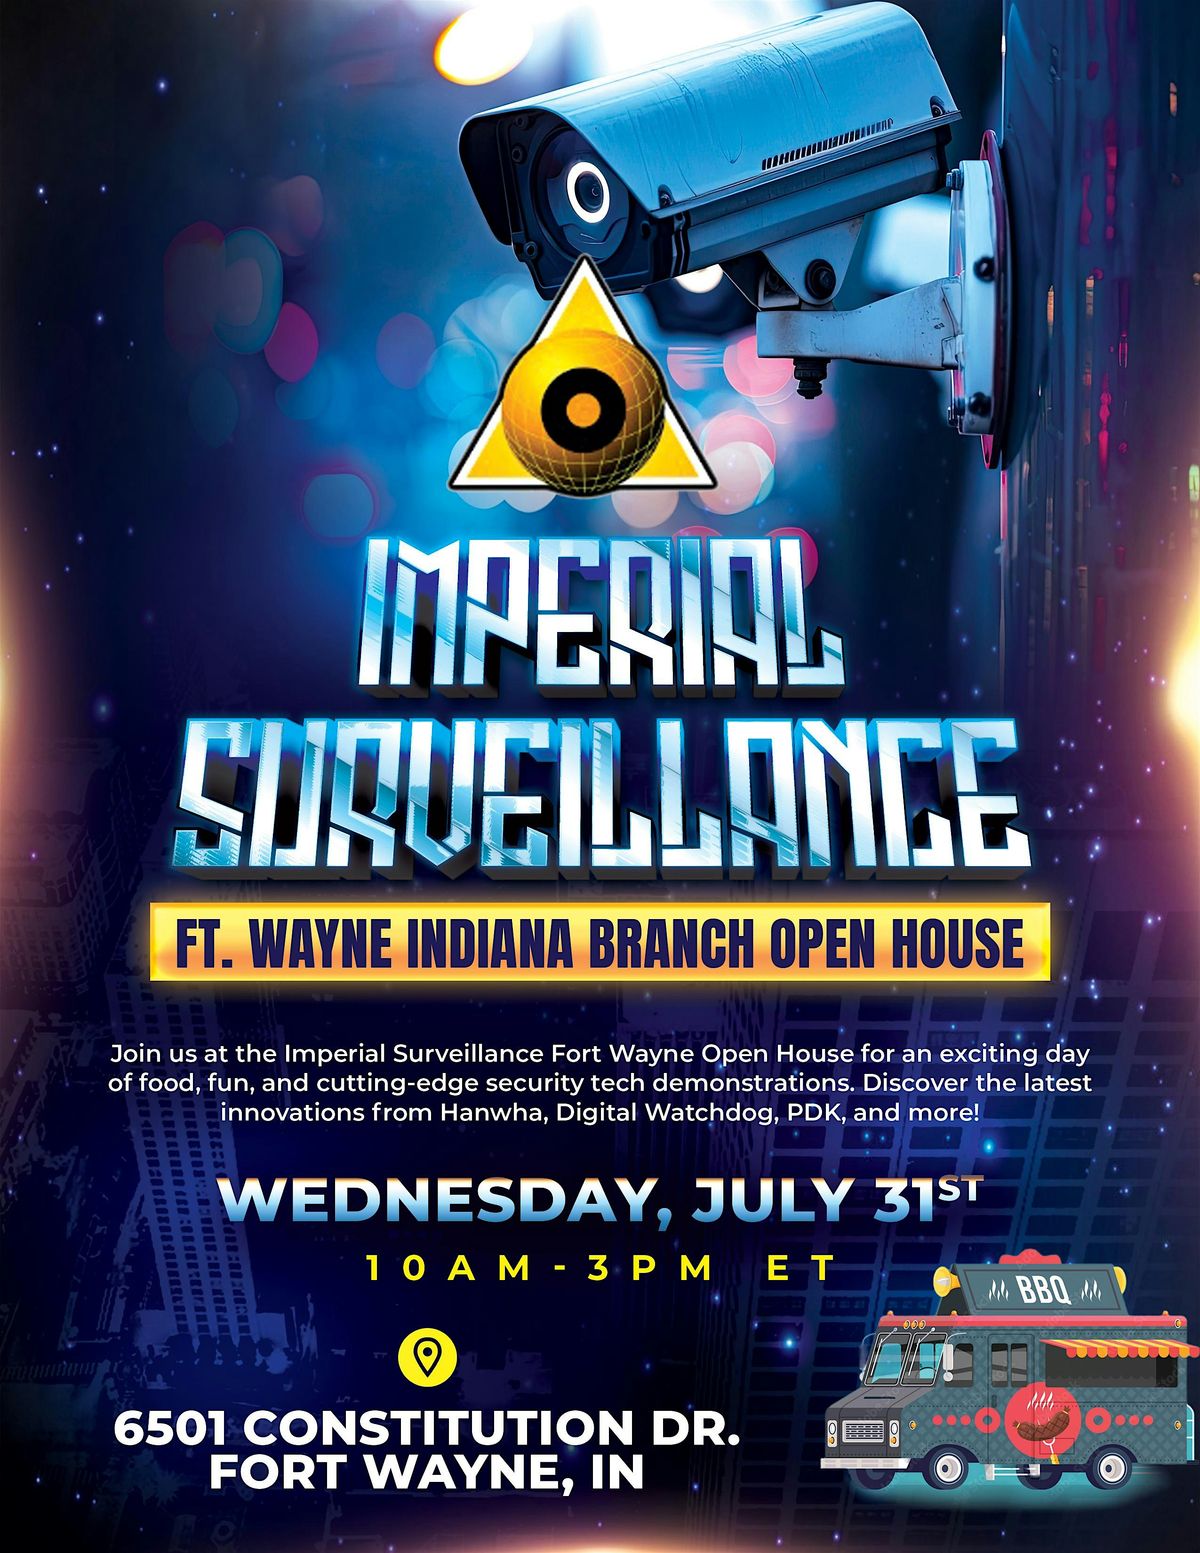 Imperial Surveillance - Fort Wayne, Indiana OPEN HOUSE